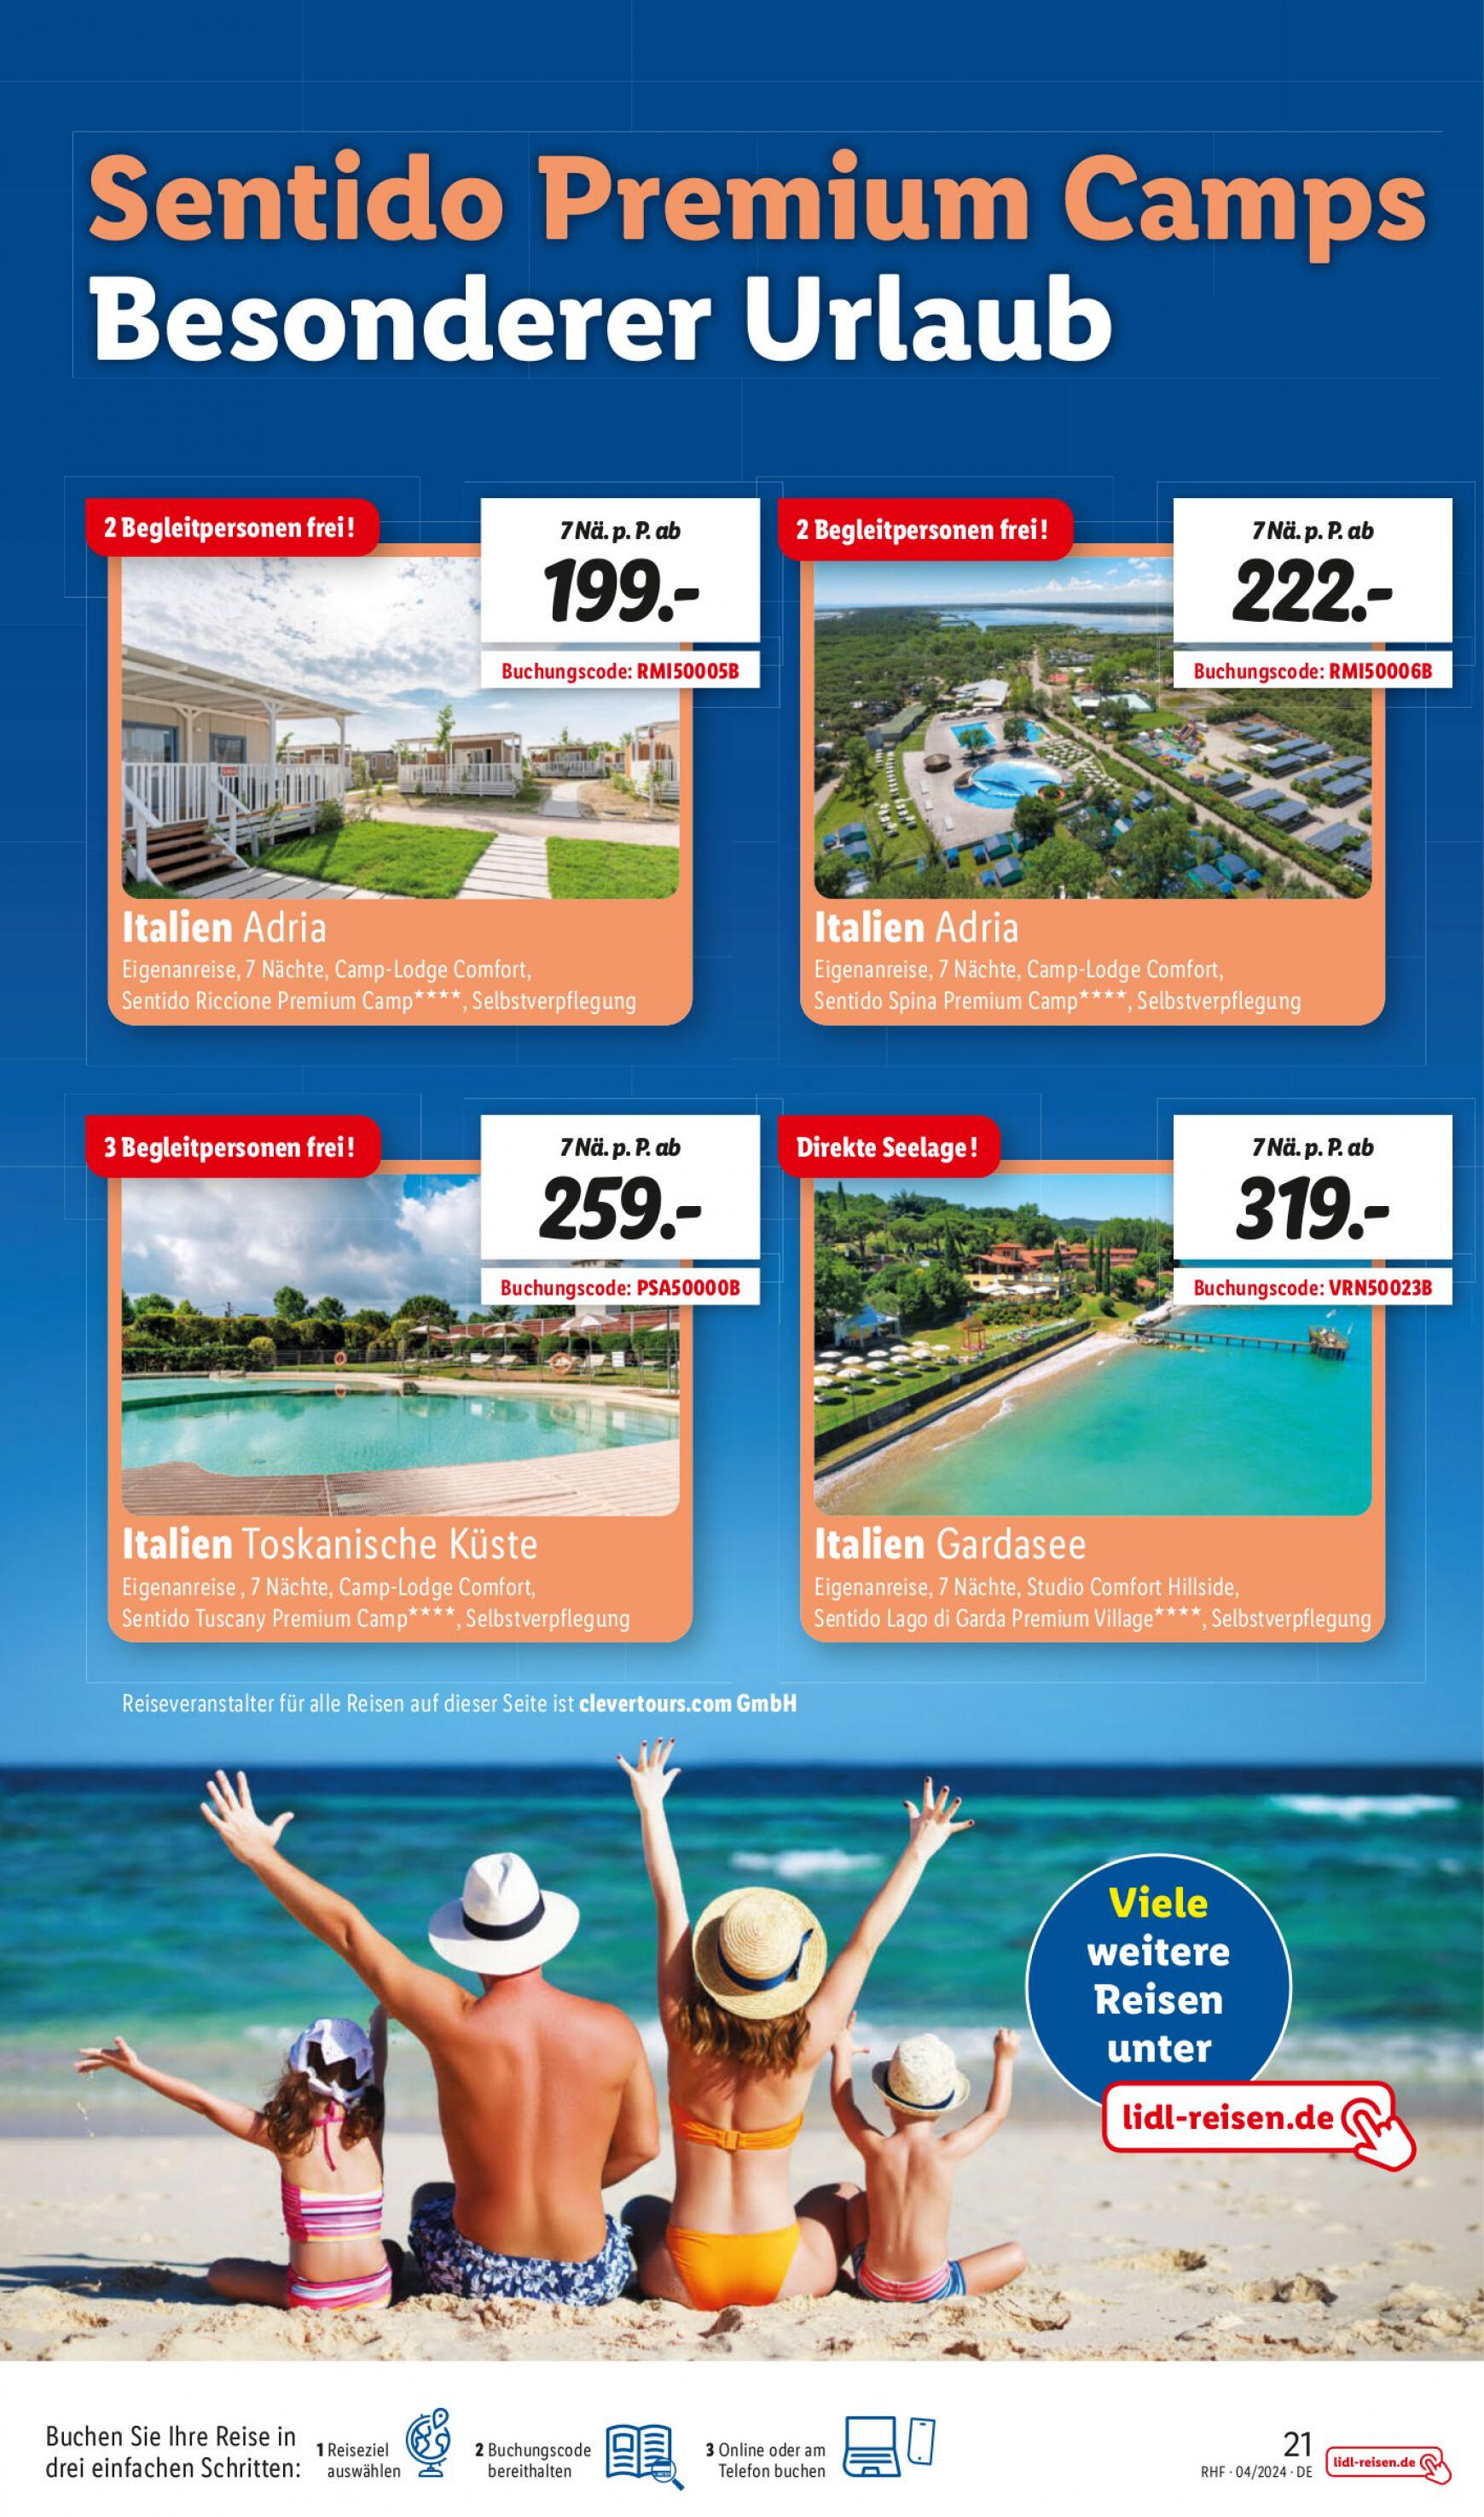 lidl - Flyer Lidl - April Reise-Highlights aktuell 27.03. - 30.04. - page: 21